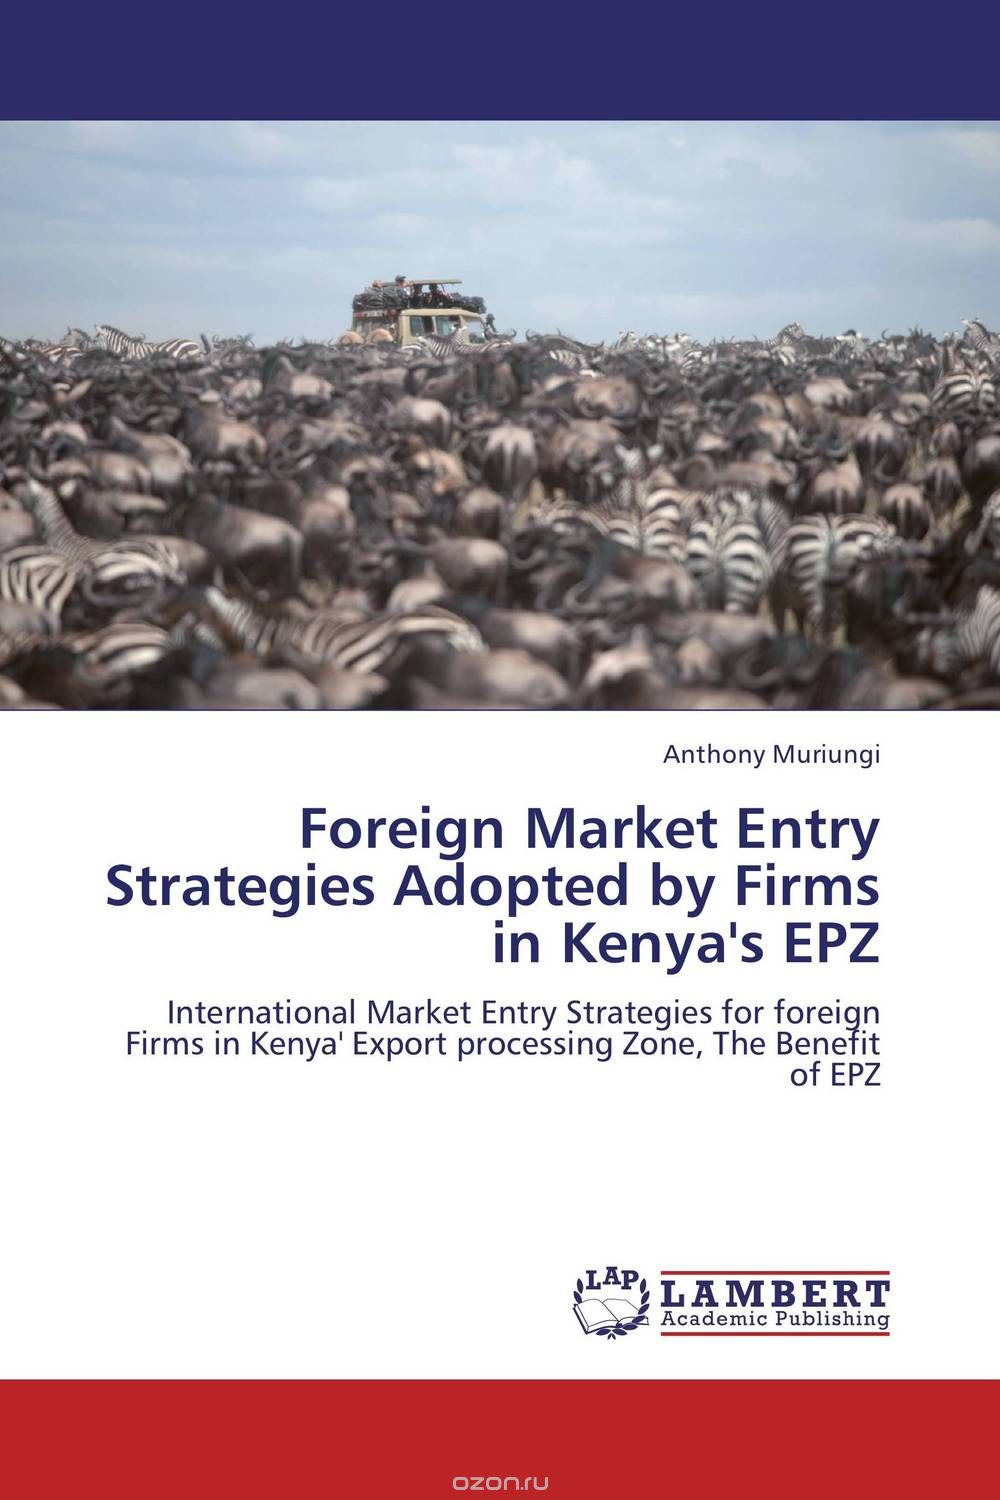 Скачать книгу "Foreign Market Entry Strategies Adopted by Firms in Kenya's EPZ"